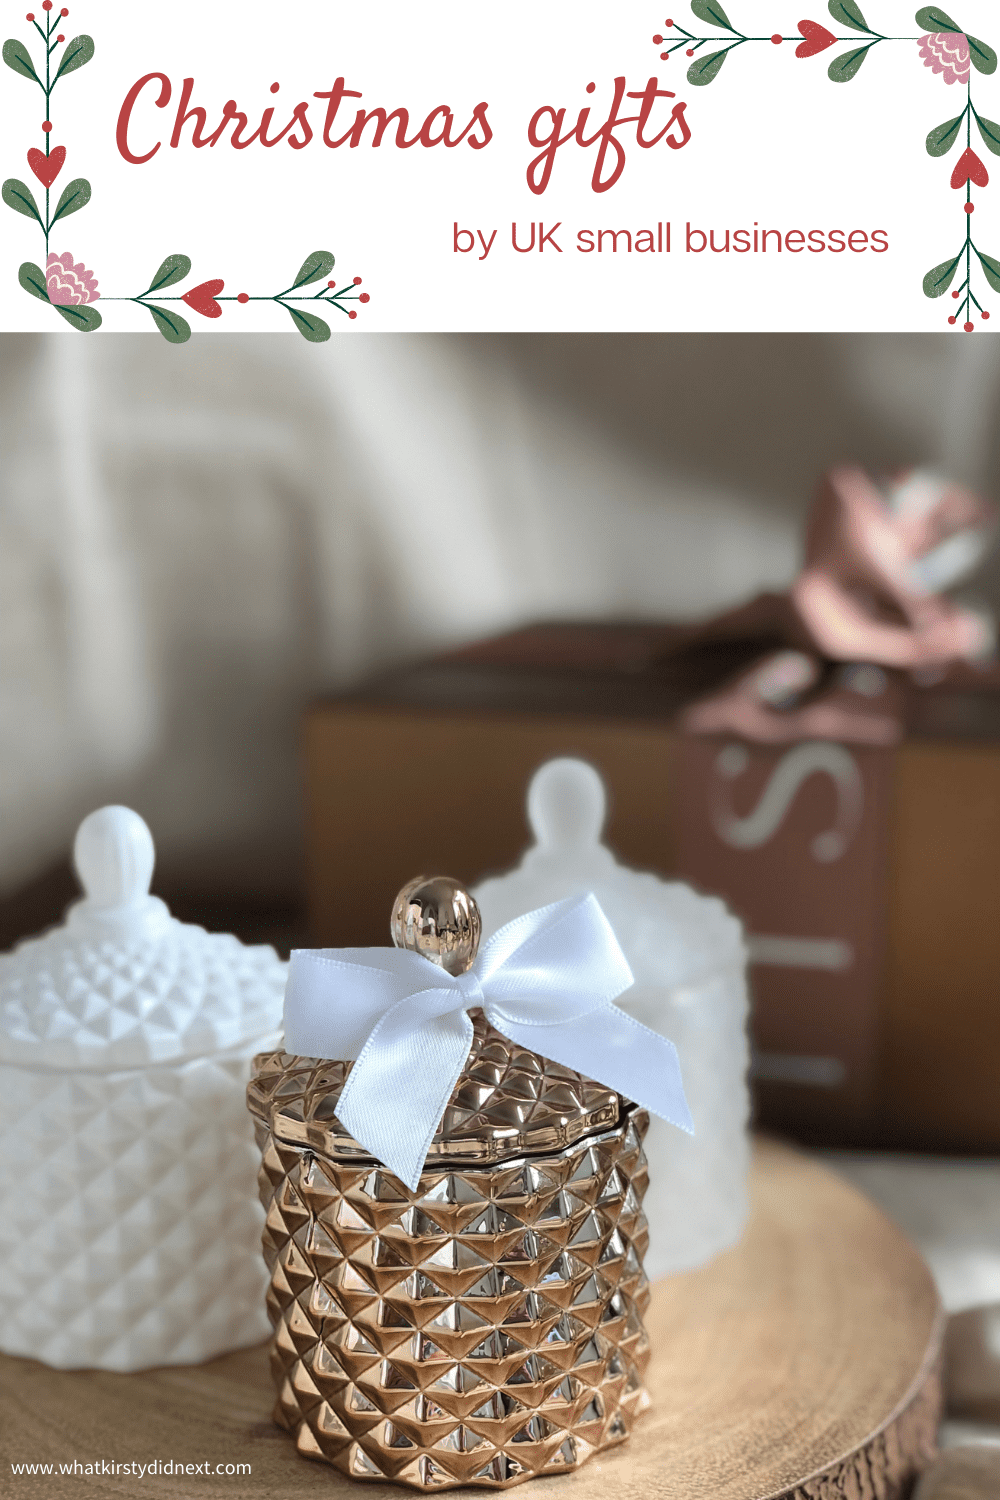 Christmas gifts by UK small businesses